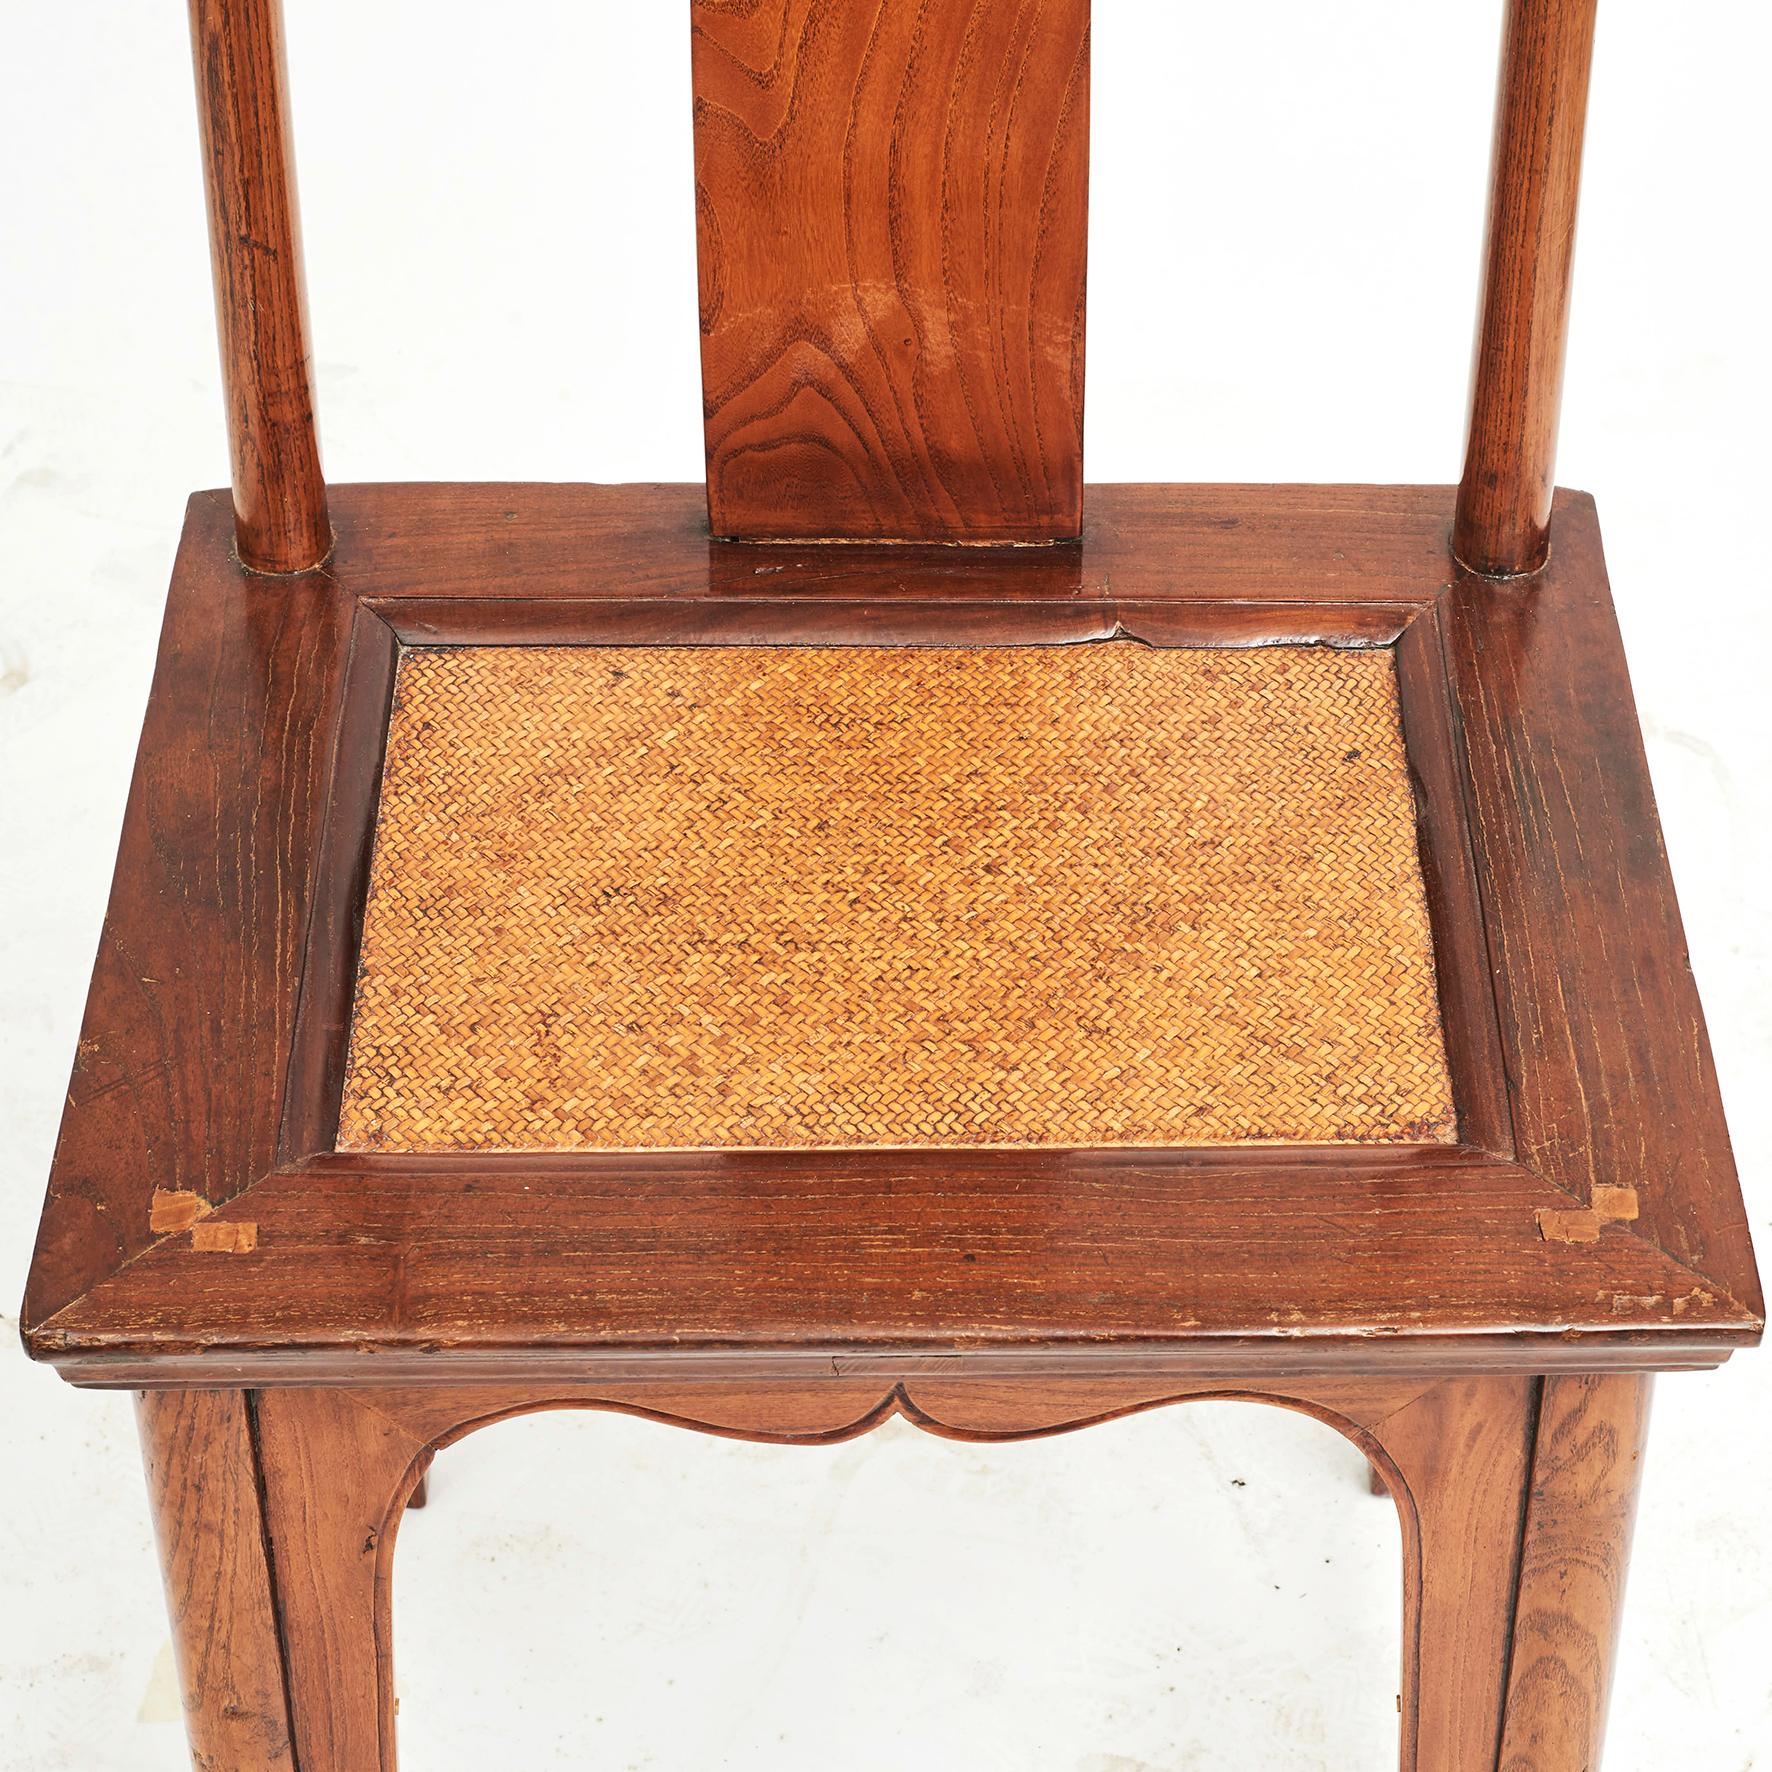 Pair of Mid-19th Century Chinese Ming Style Chairs in Jumu Wood with Wicker Seat 9